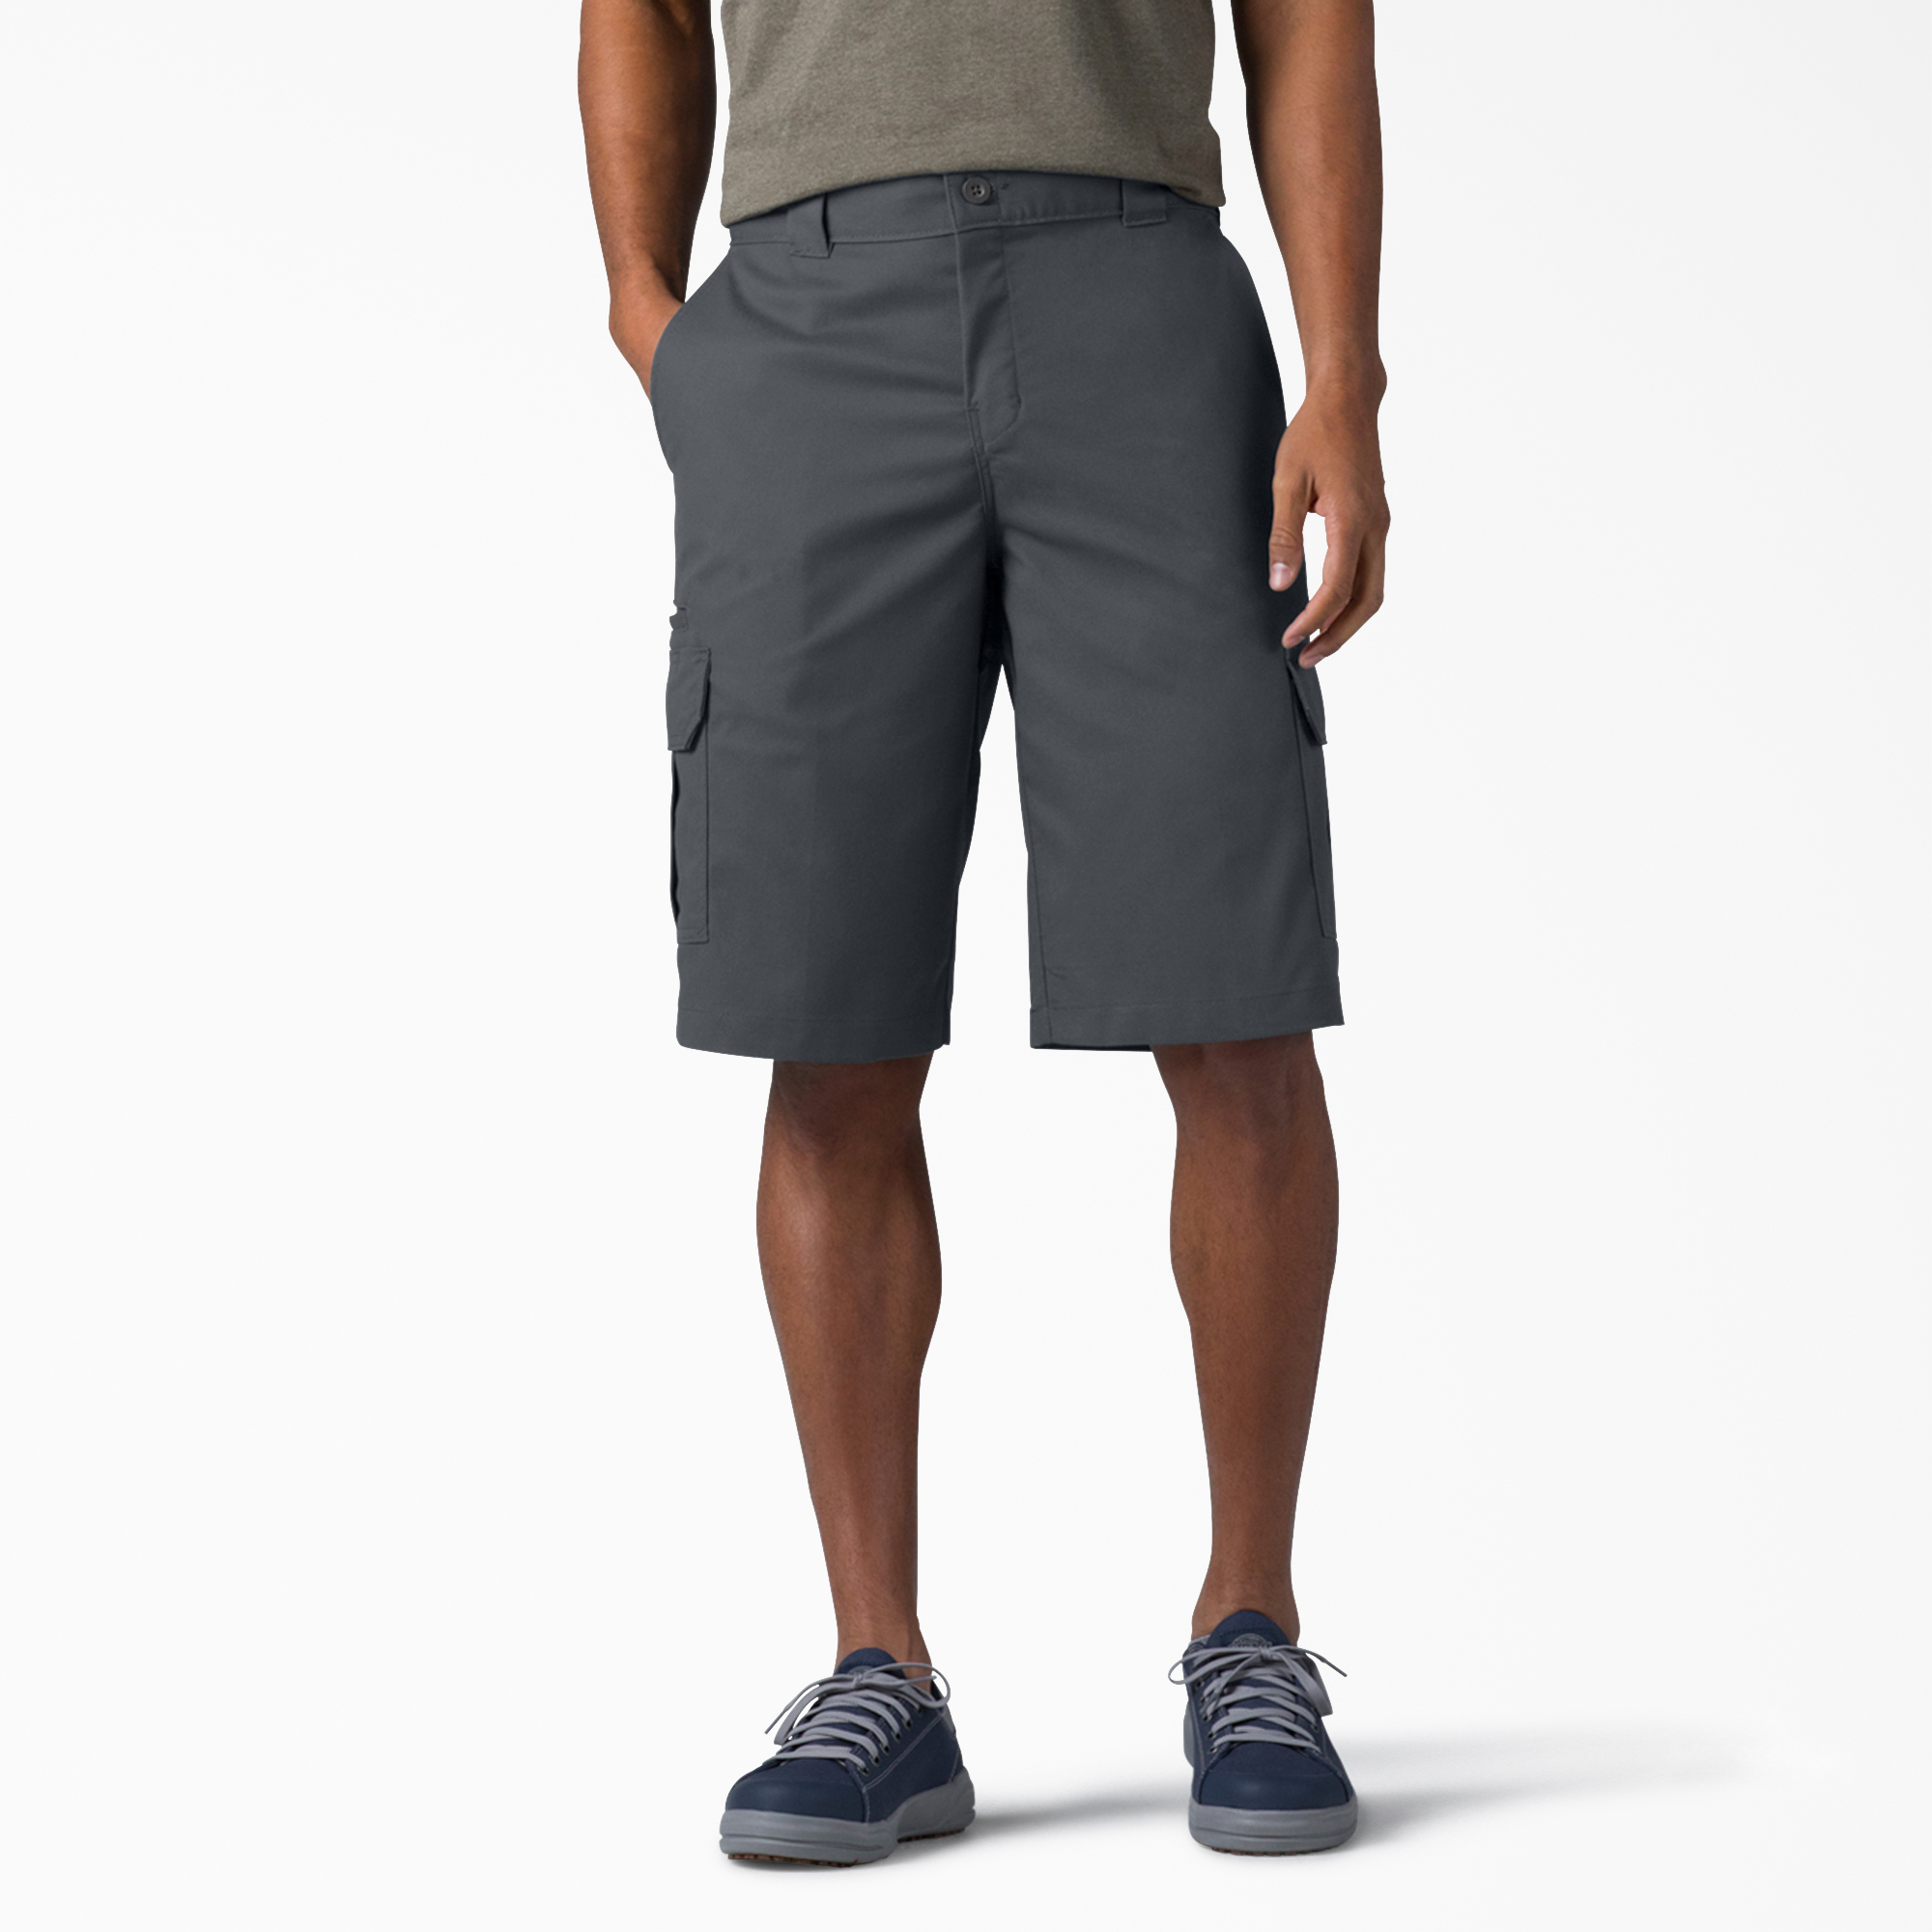 FLEX 13" Relaxed Fit Cargo Shorts - Charcoal Gray (CH)